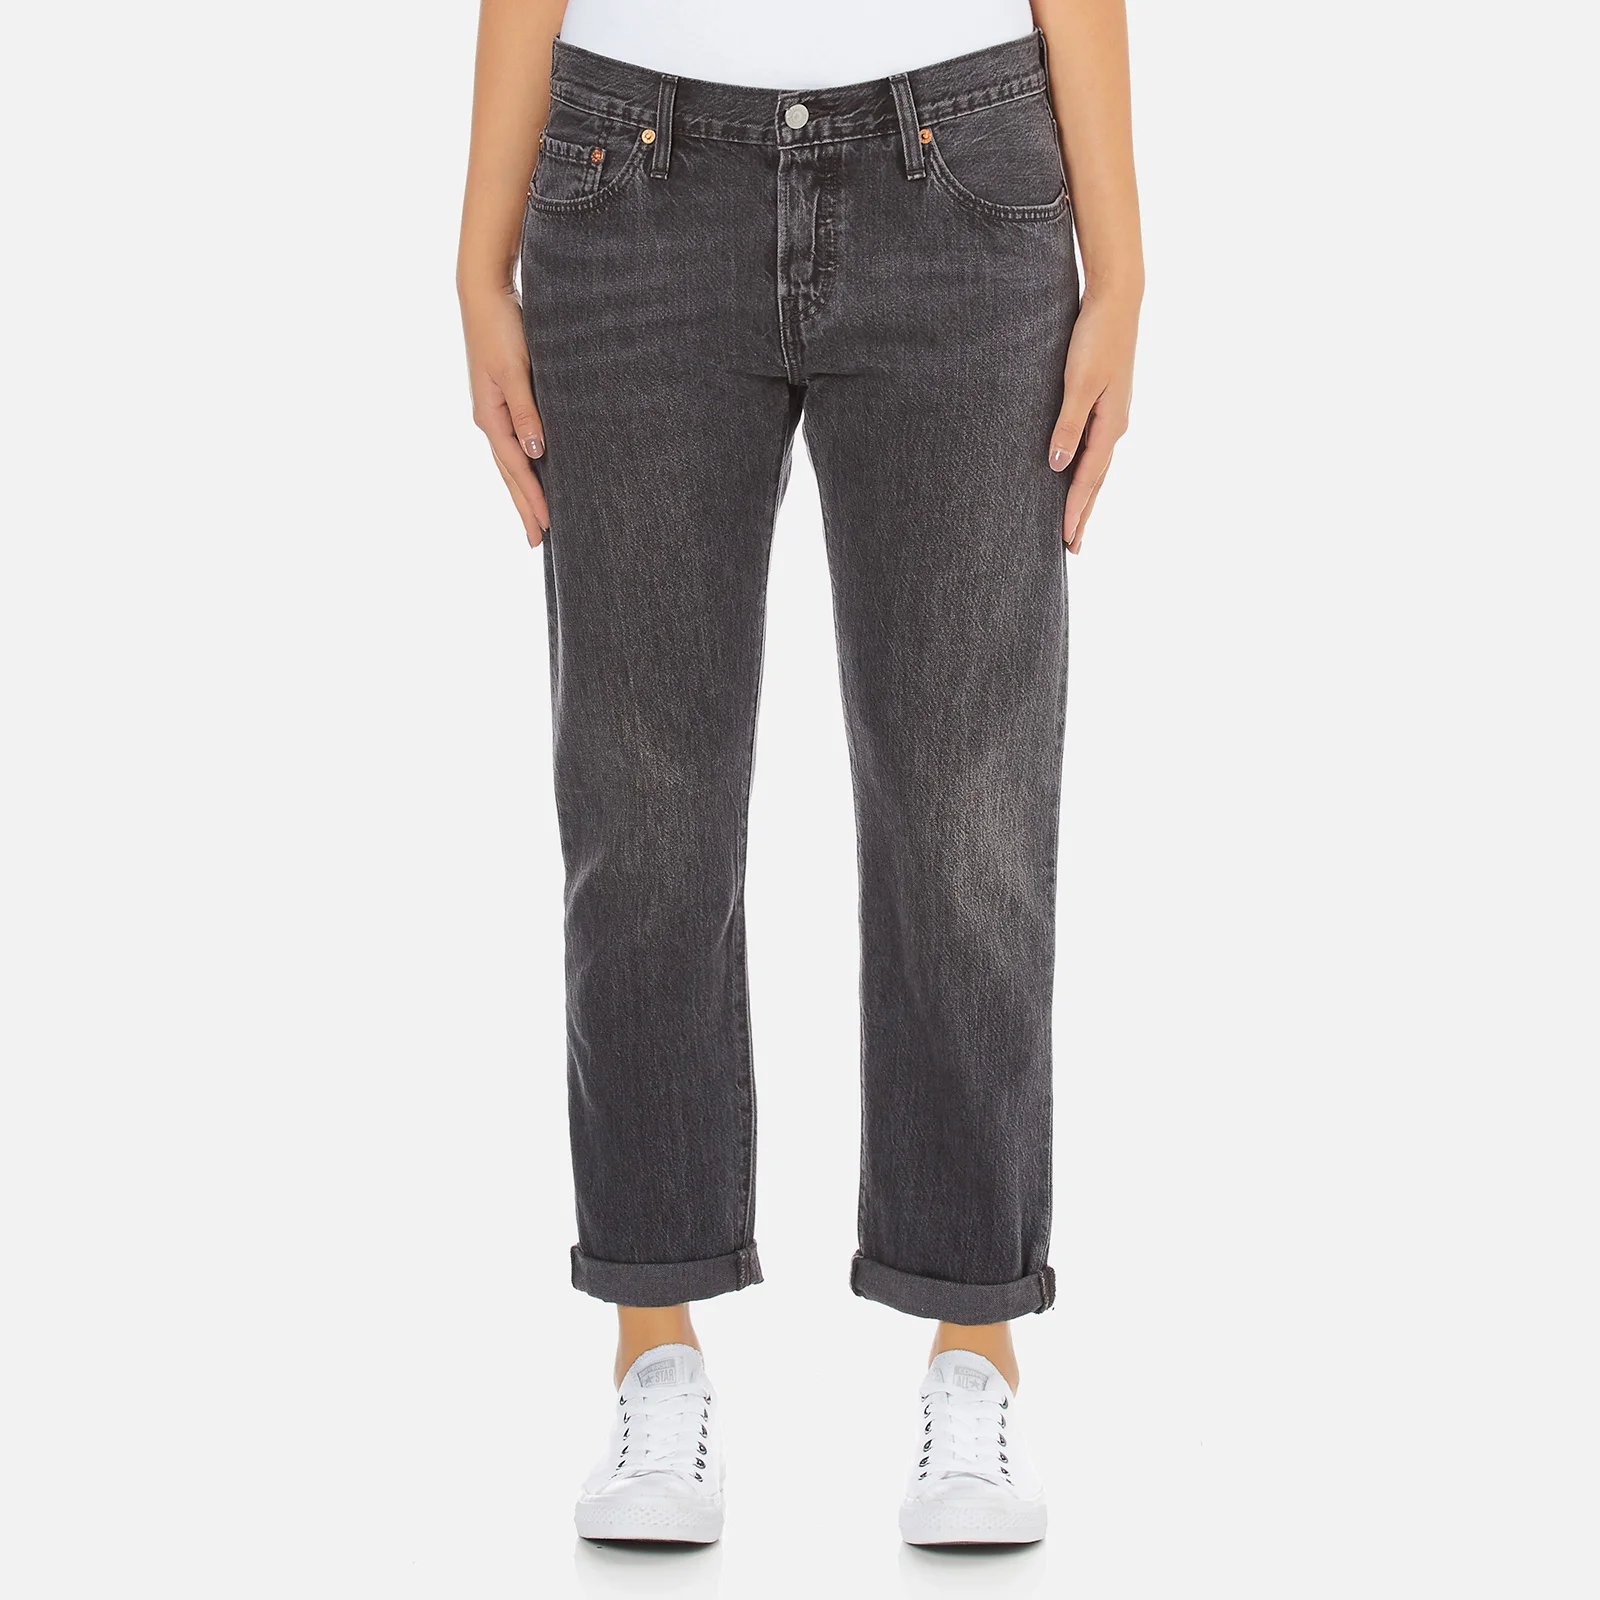 Levi's Women's 501 CT Tapered Fit Jeans - Fading Coal Image 1